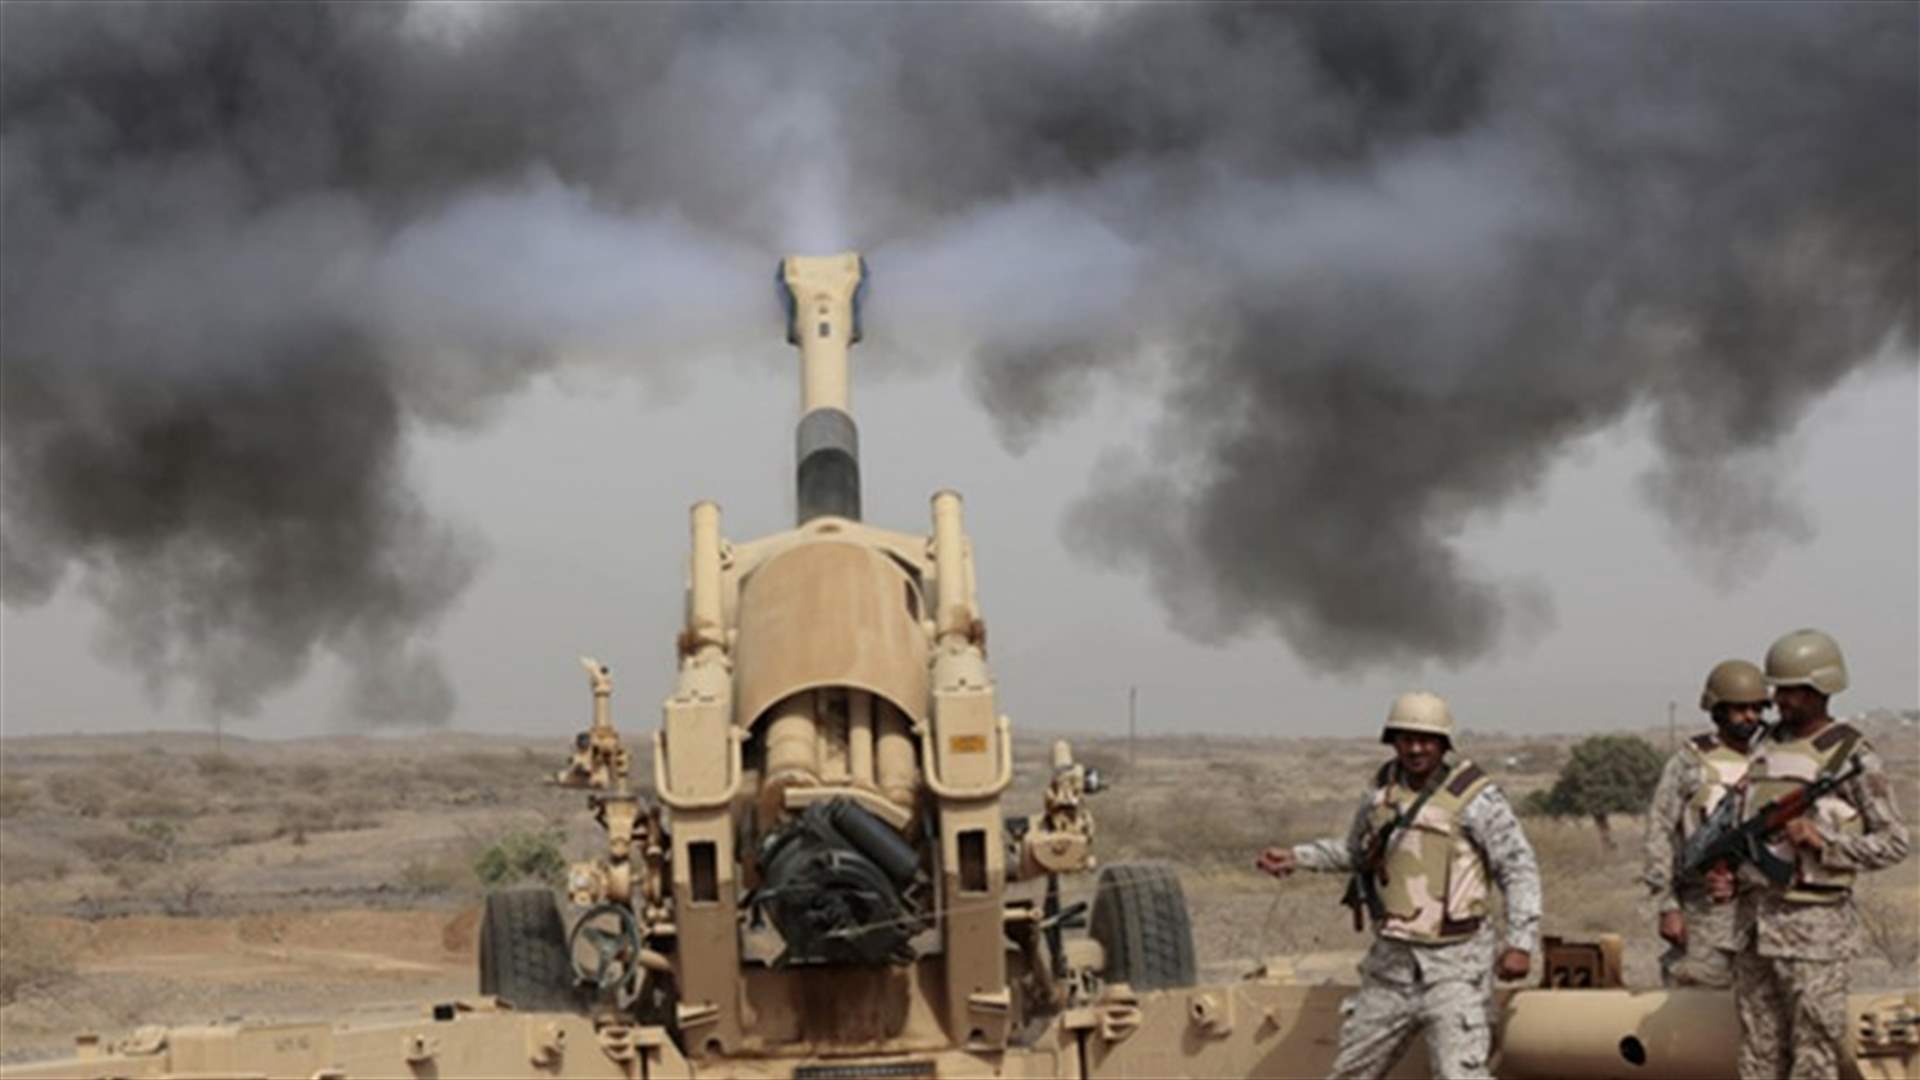 Fourteen injured in Saudi Arabia by projectiles fired from Yemen -civil defense